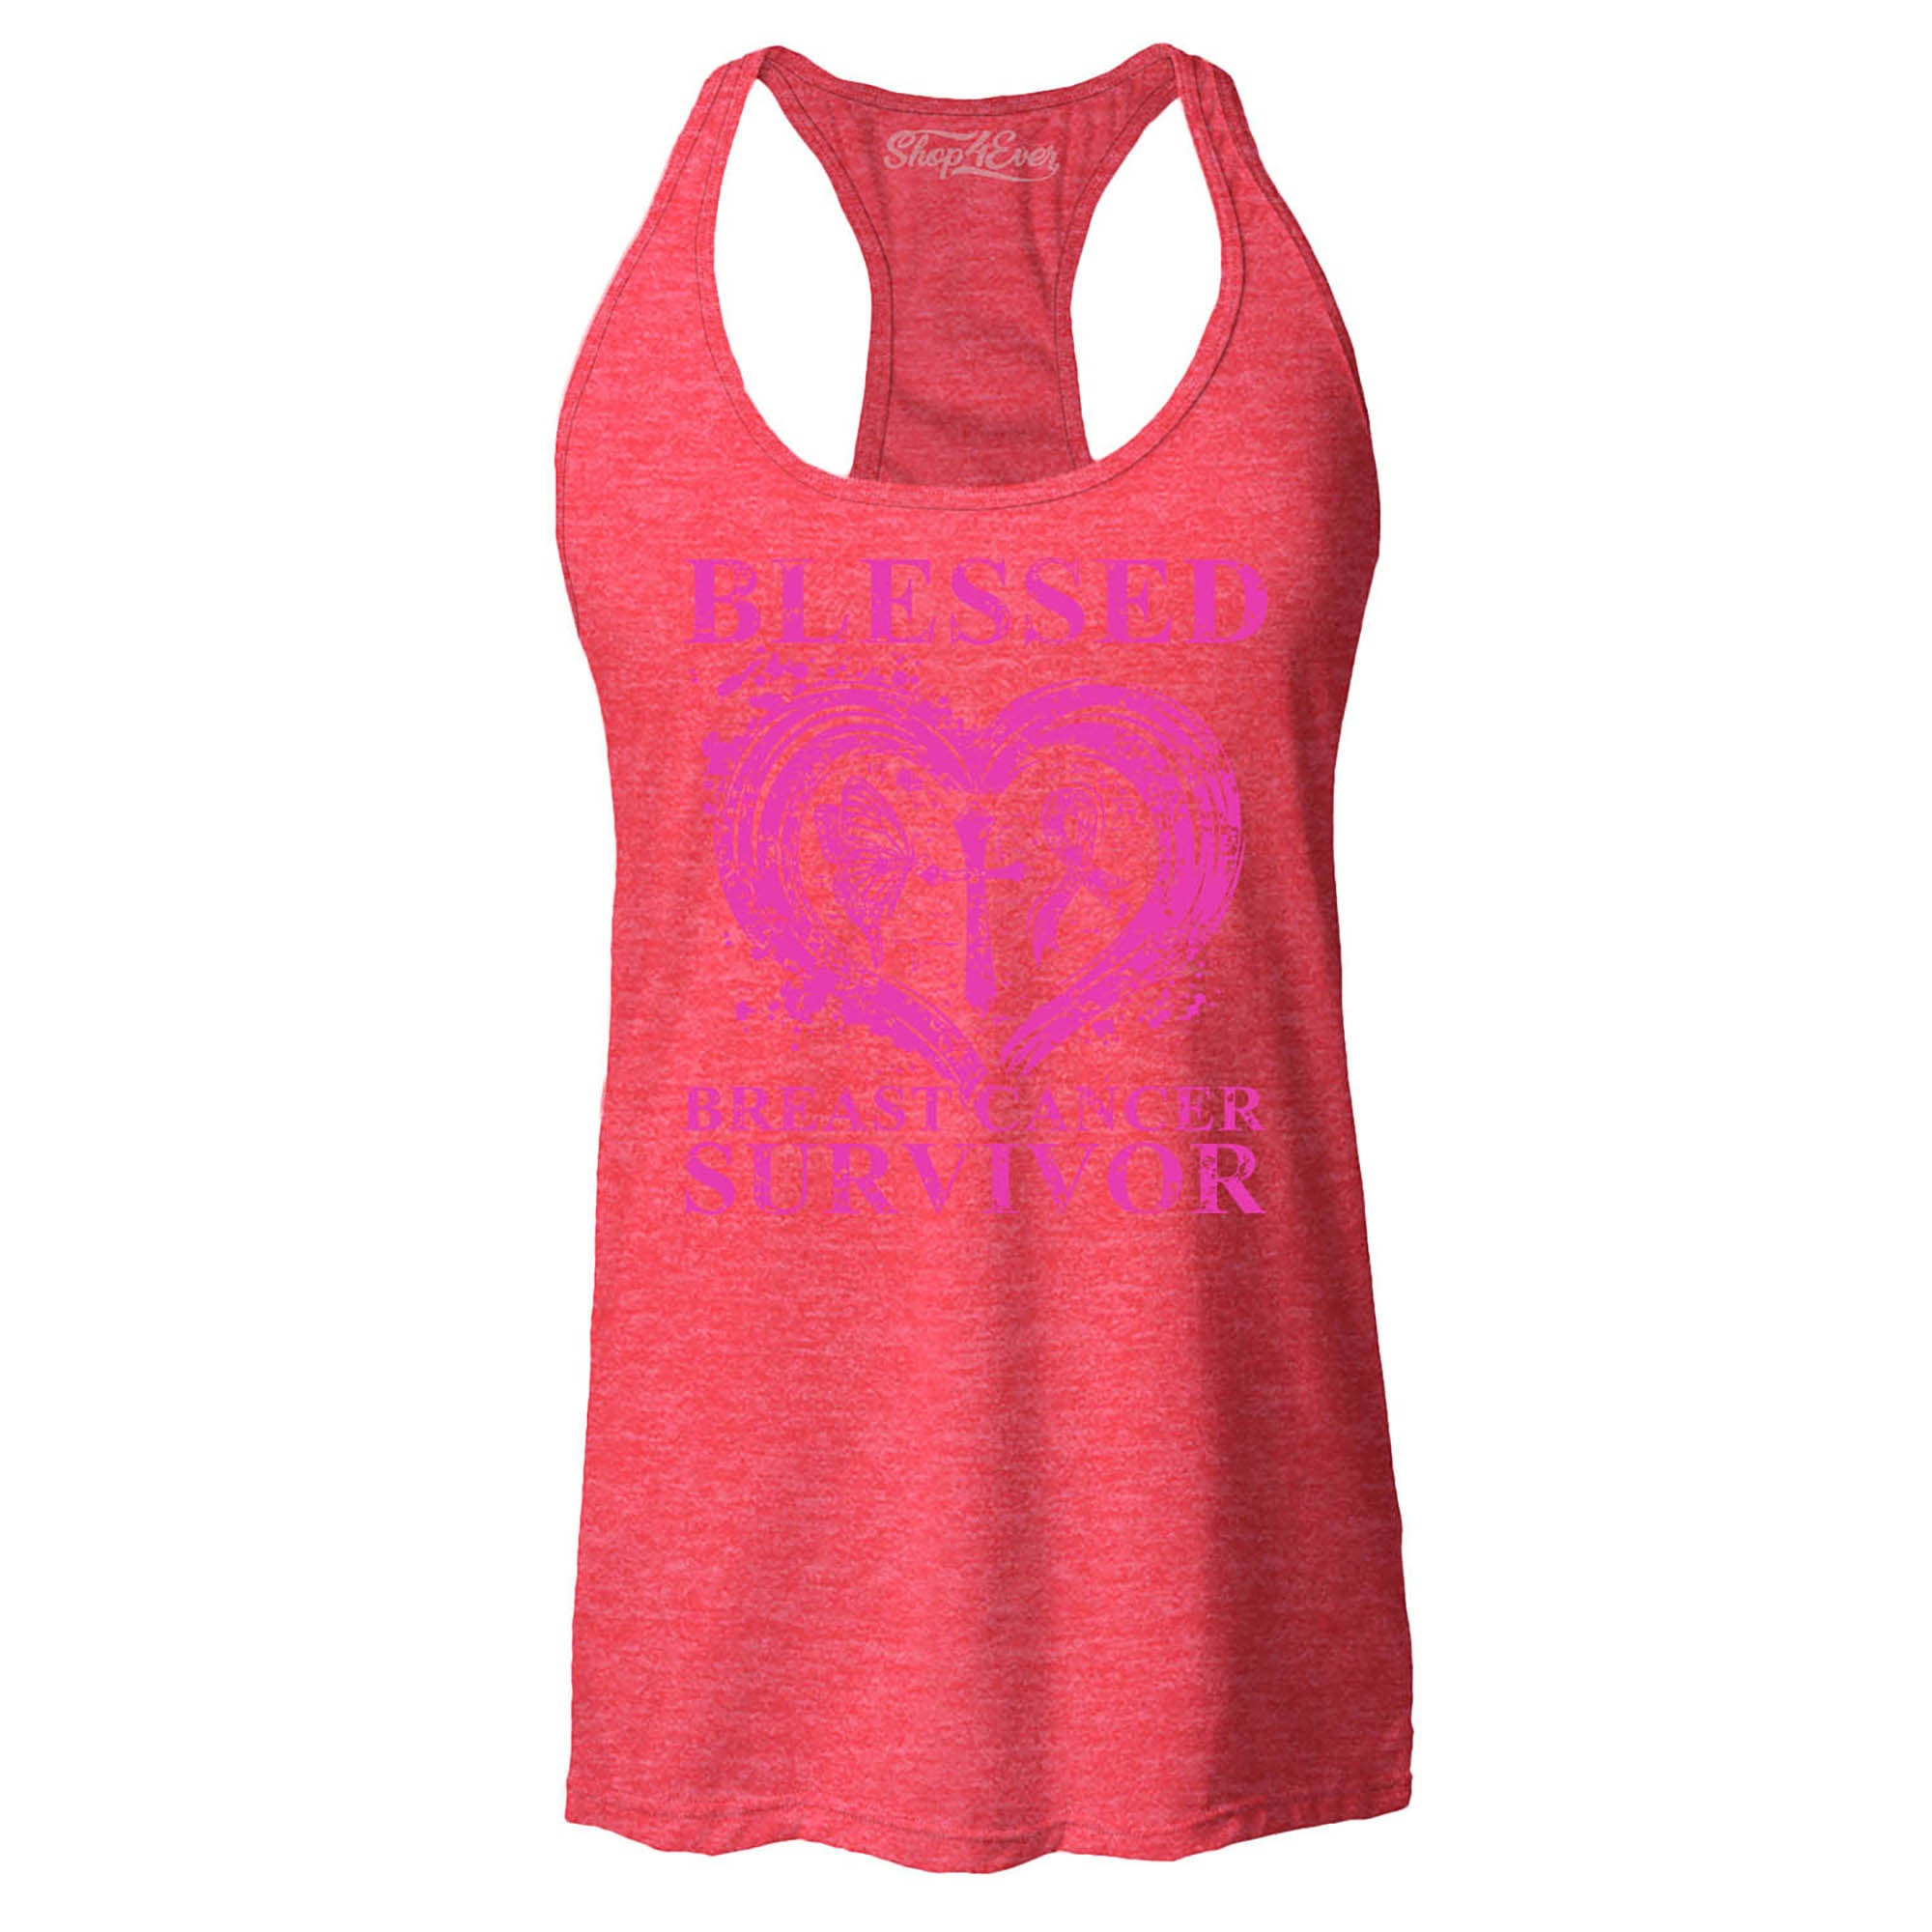 Blessed Breast Cancer Awareness Women's Racerback Tank Top Slim Fit